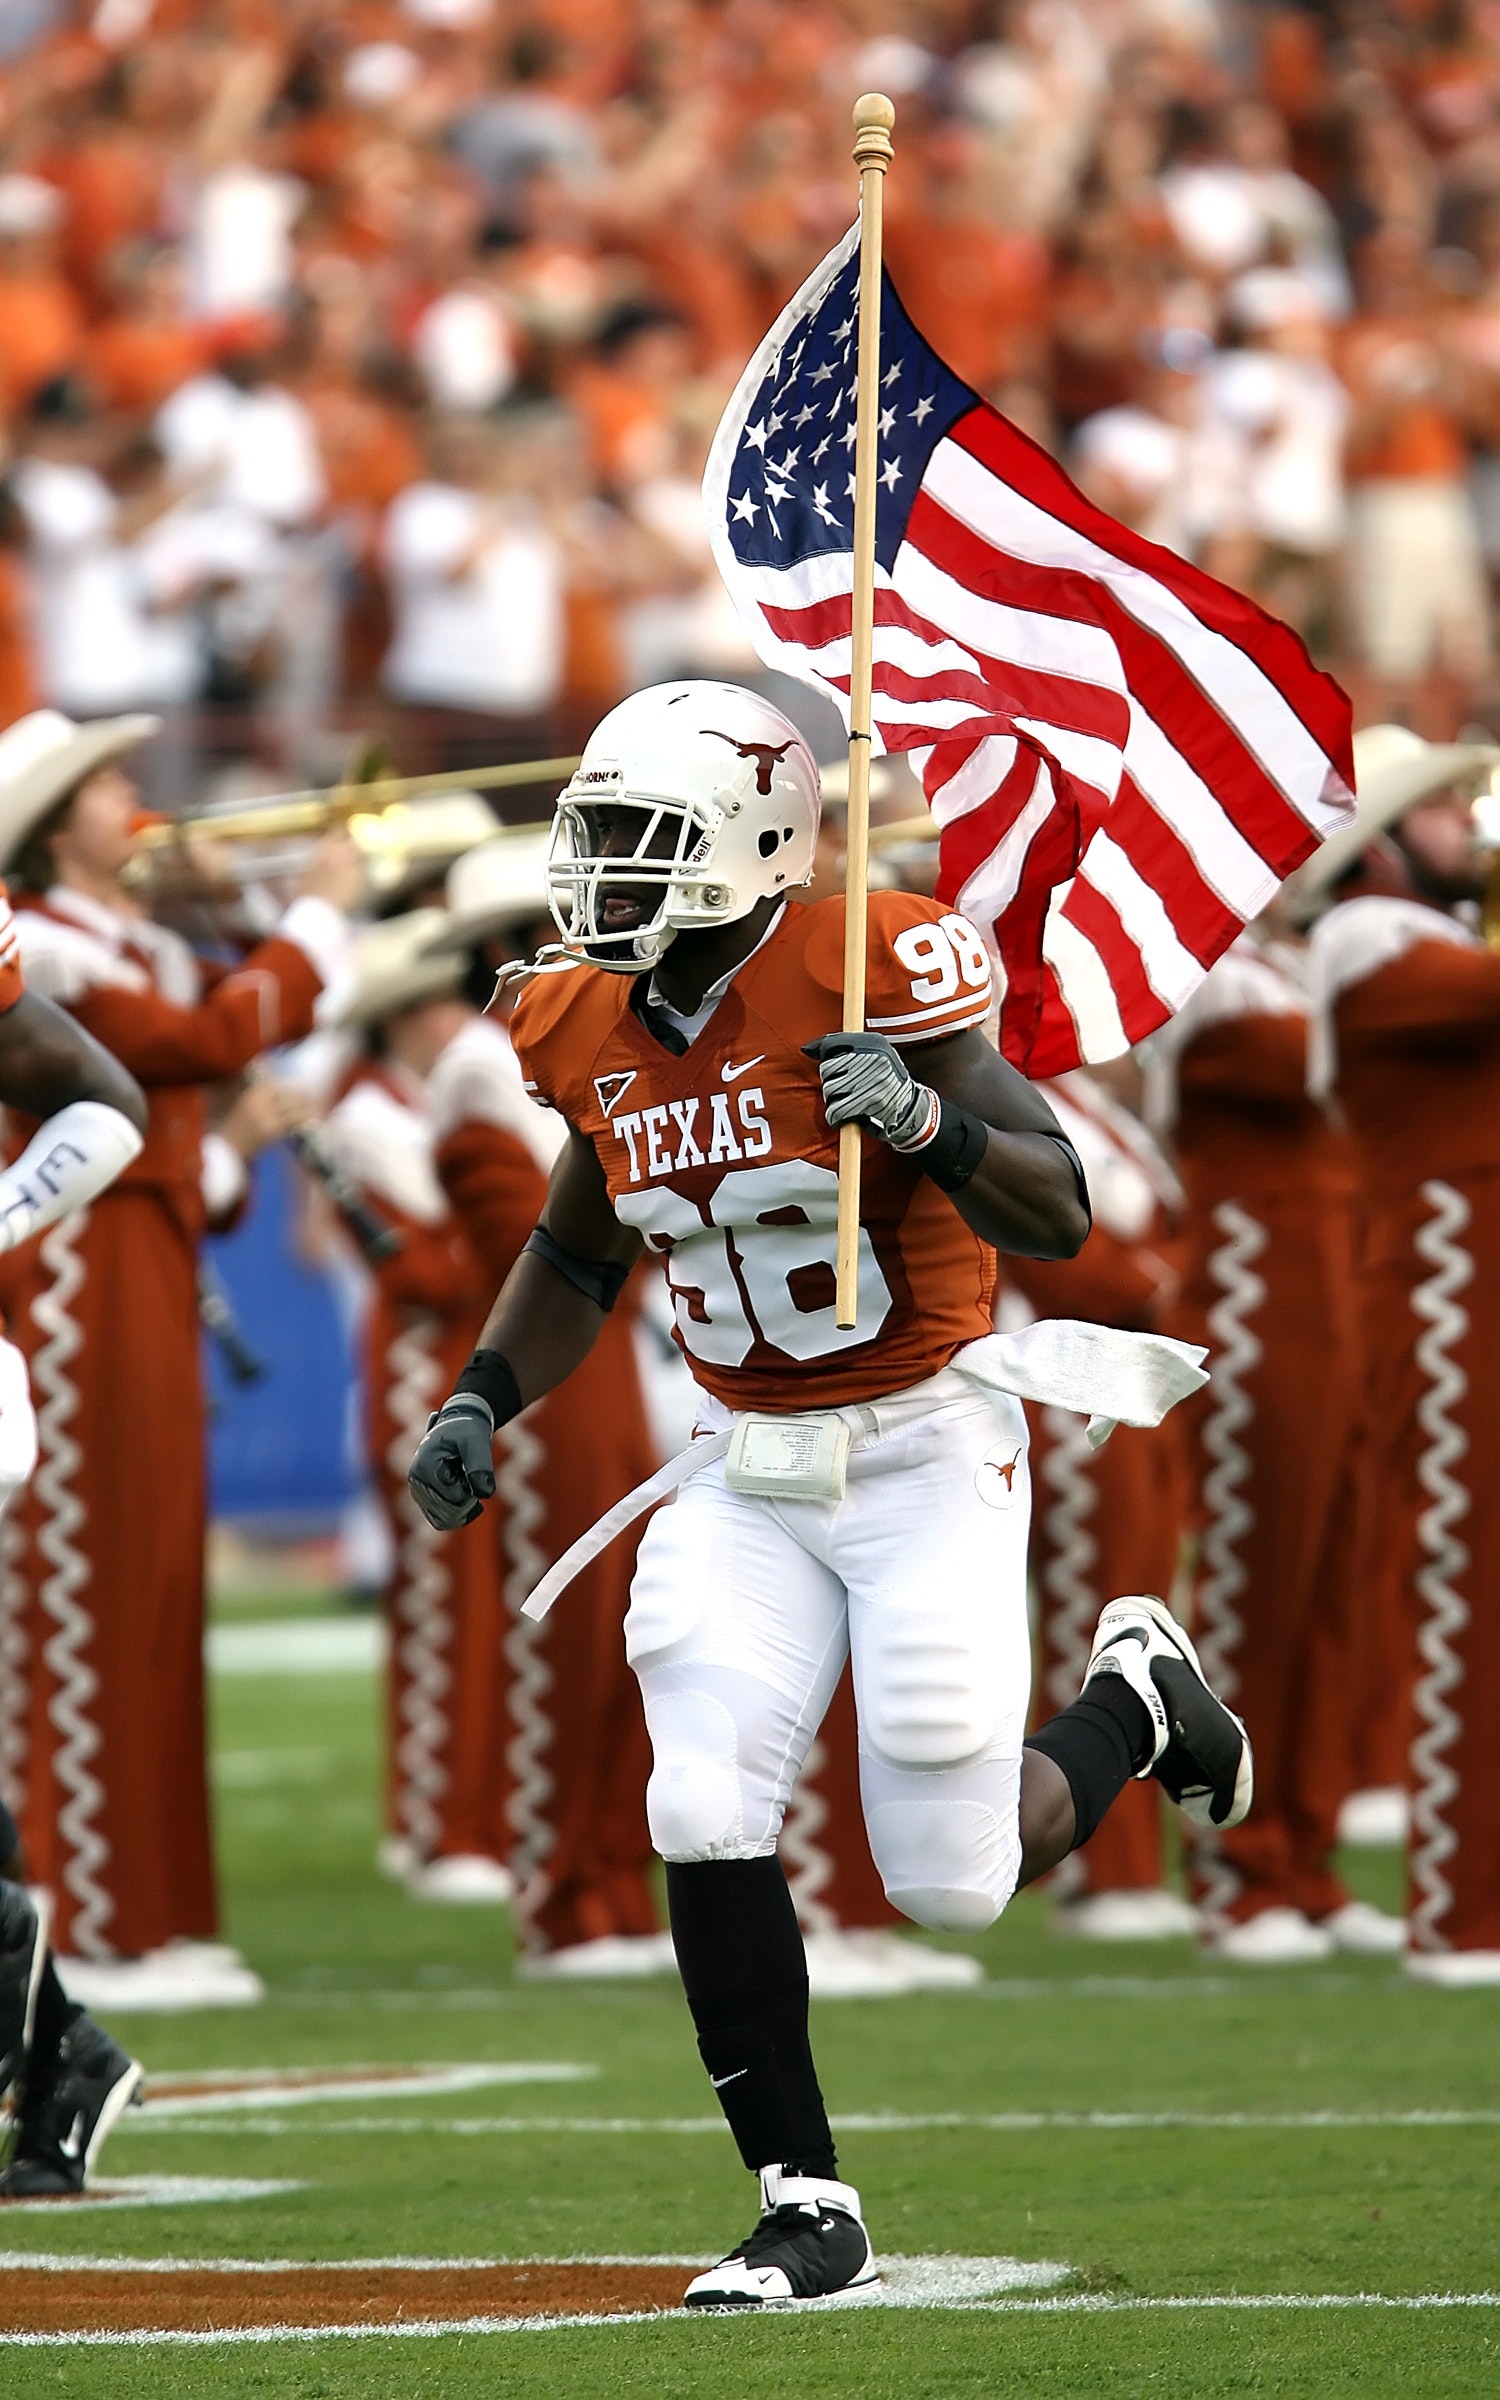 Nfl player holding u.s.a. flag on field photo